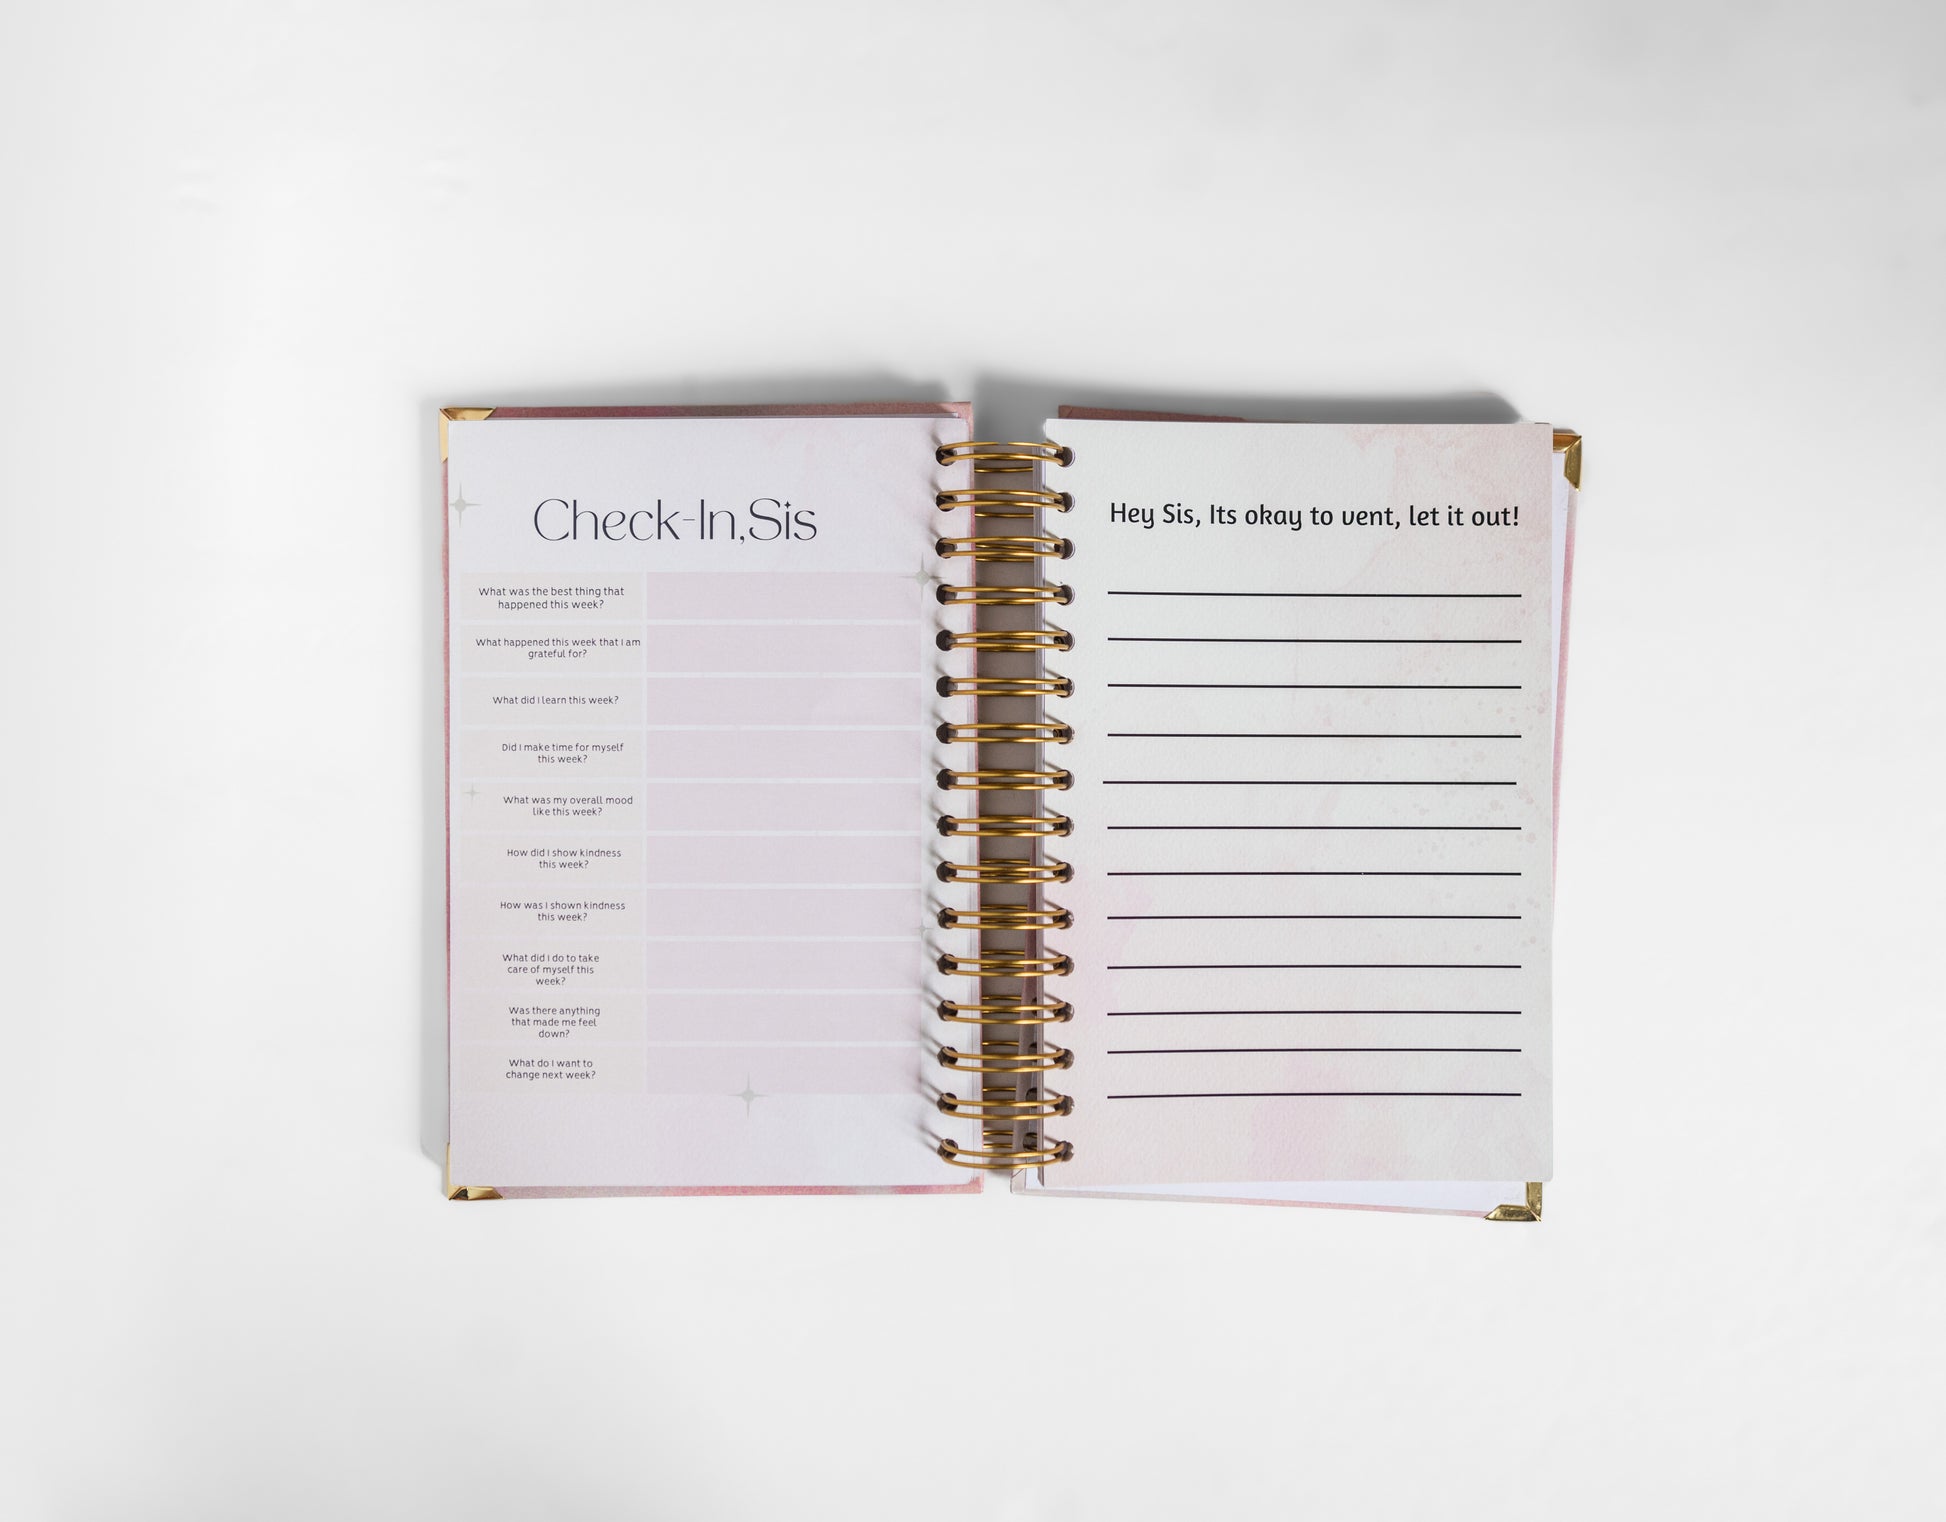 A Prison Wives Journal with a dedicated section for weekly check-ins and venting. The journal provides a safe and supportive space for prison wives to reflect on their emotions, experiences, and challenges throughout the week. The check-in pages allow them to track their progress, set goals, and celebrate accomplishments